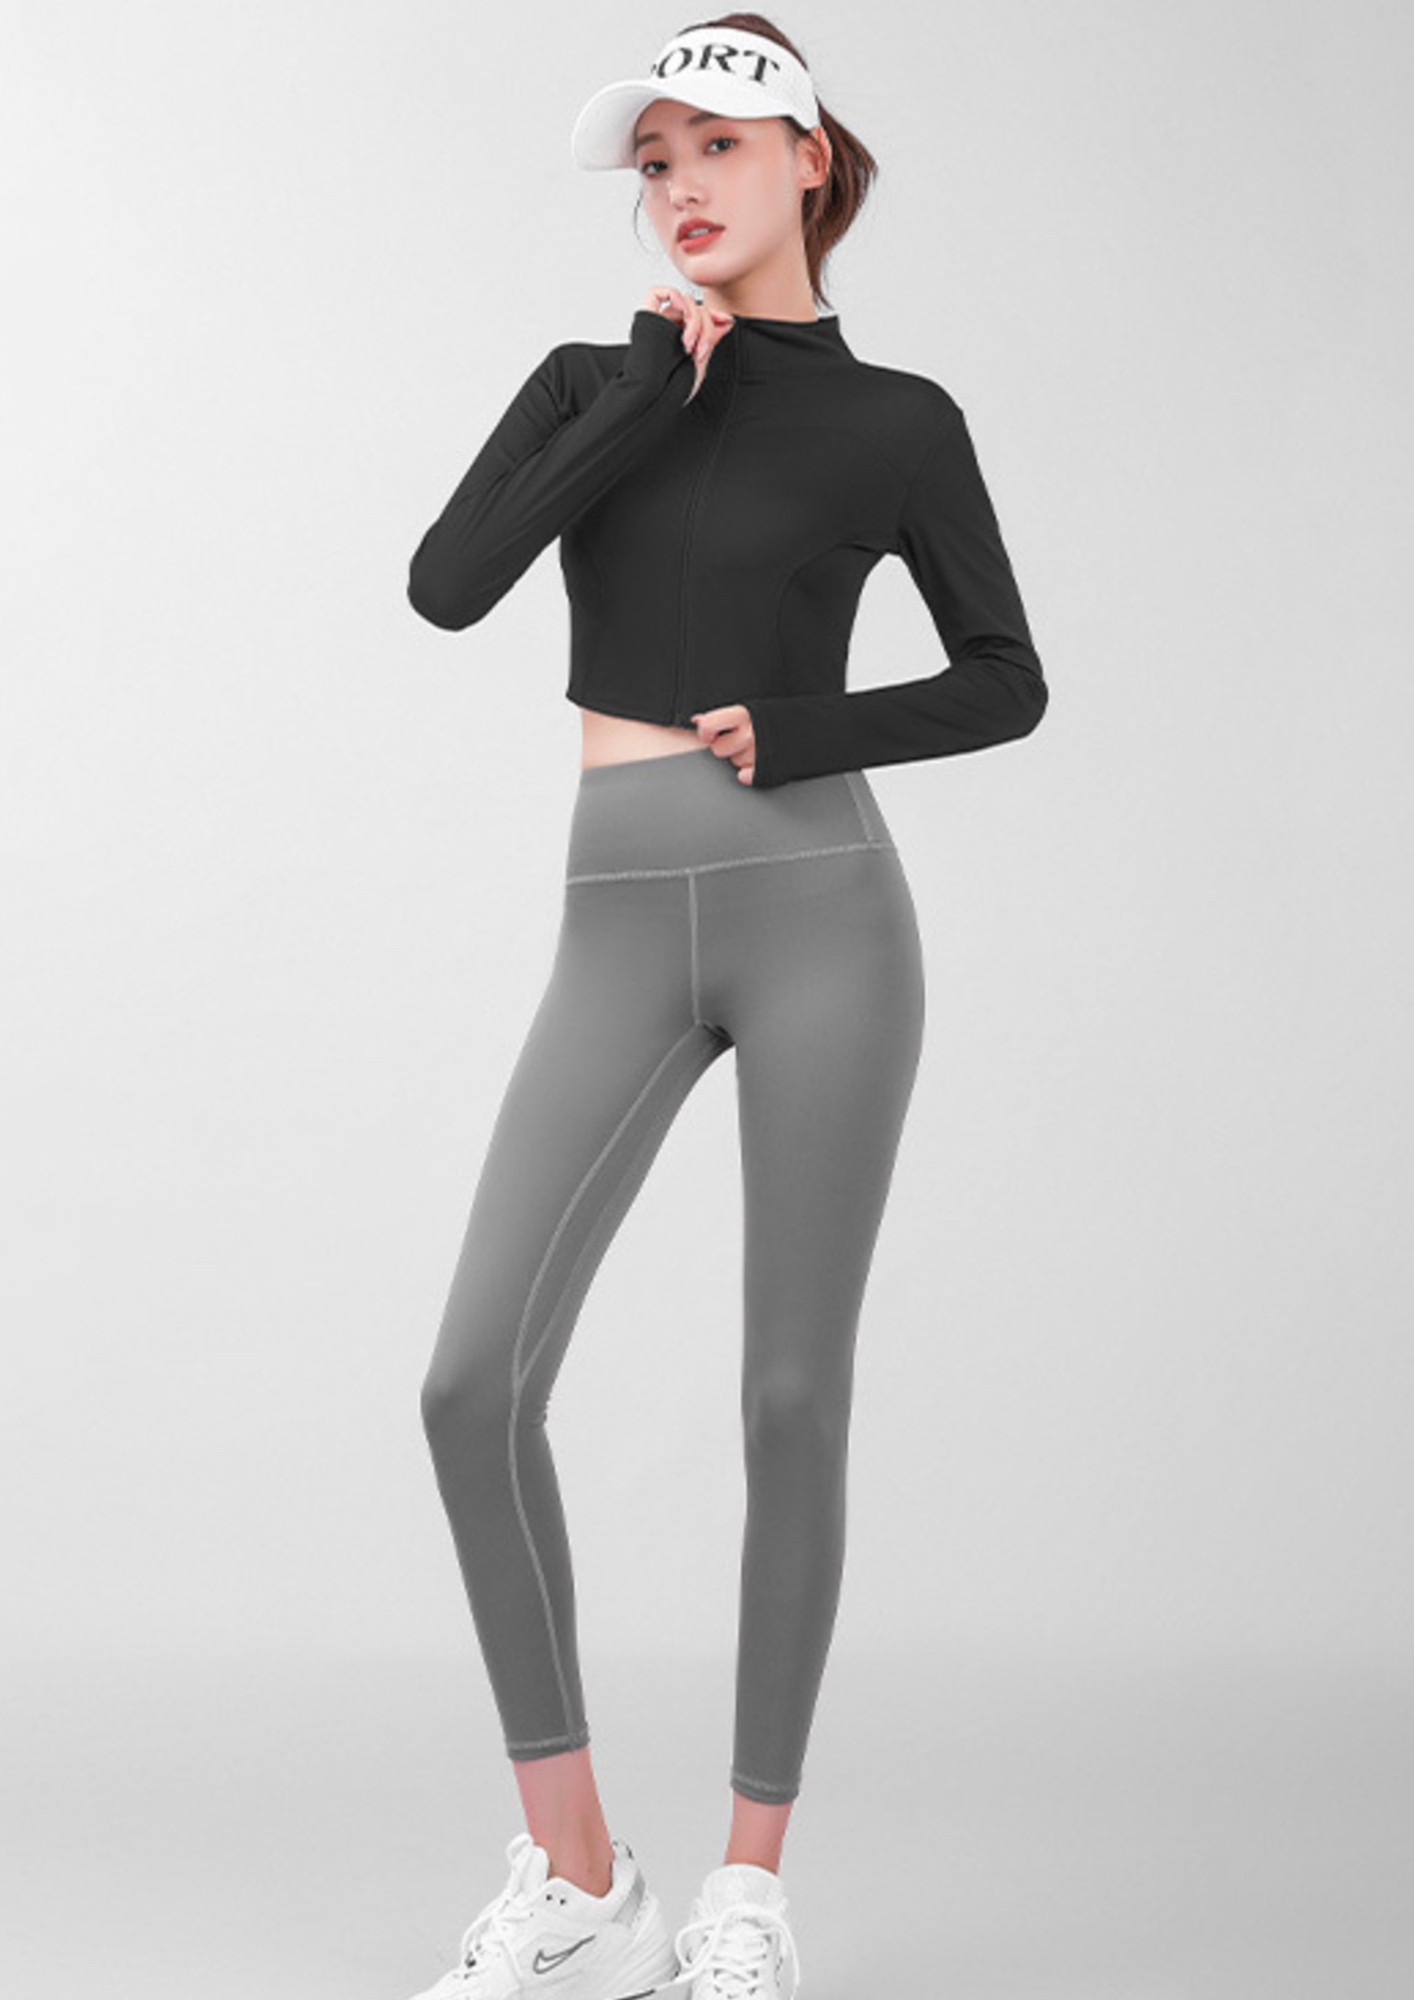 COLLARED BLACK KNIT SEAMLESS CROPPED SPORTS JACKET